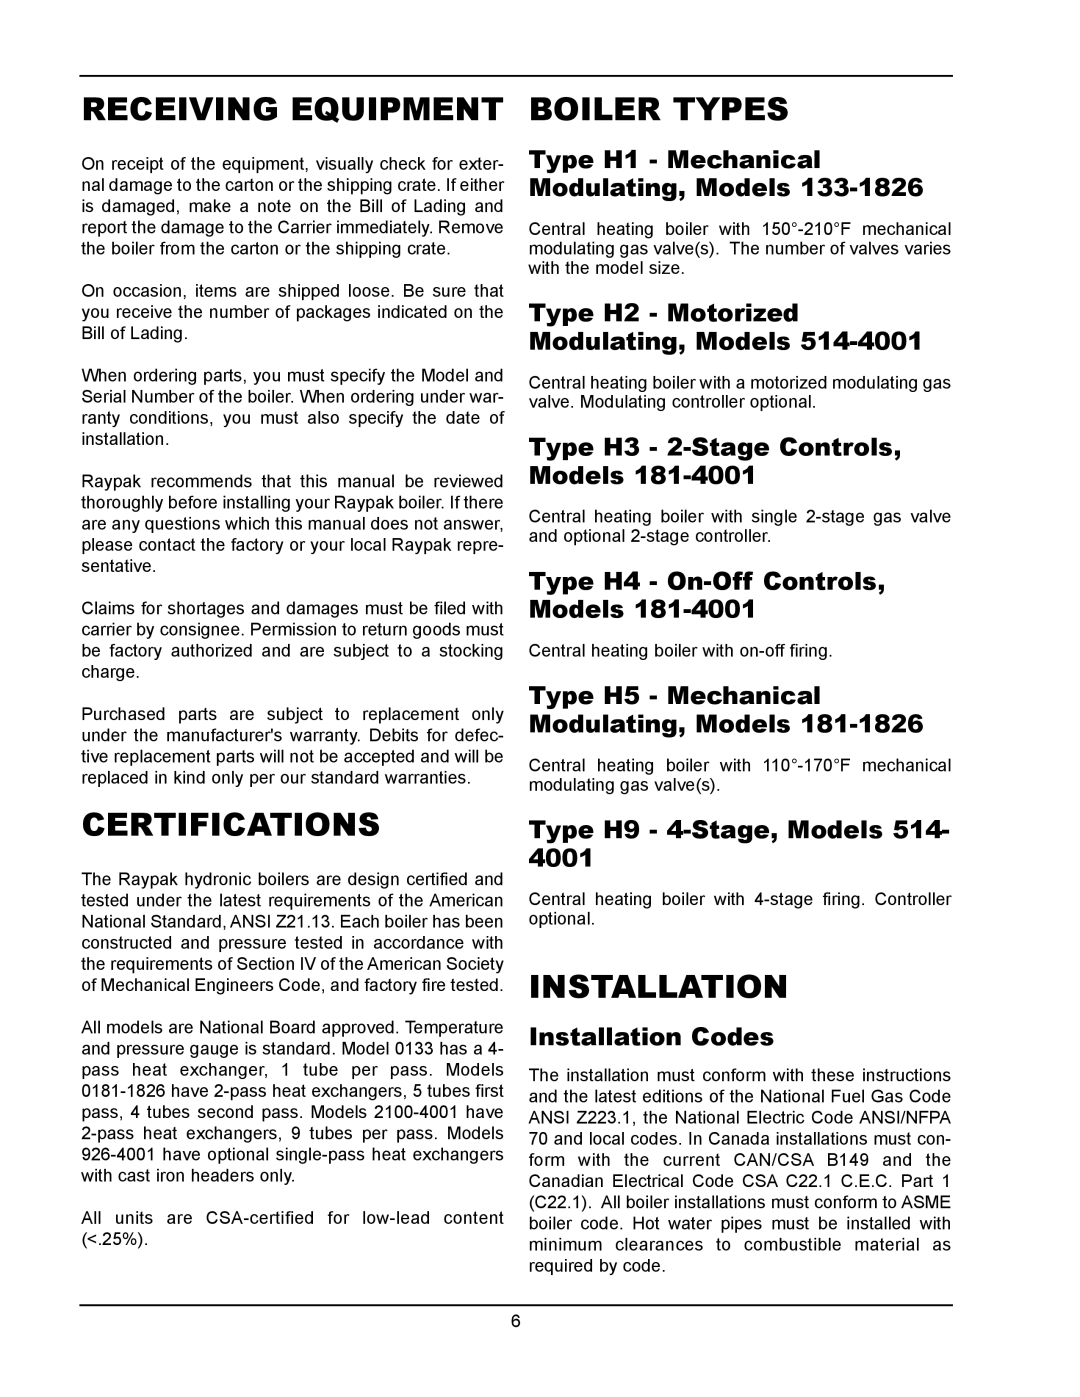 Raypak 133-4001 manual Receiving Equipment, Certifications, Boiler Types, Installation, Type H3 - 2-StageControls, Models 